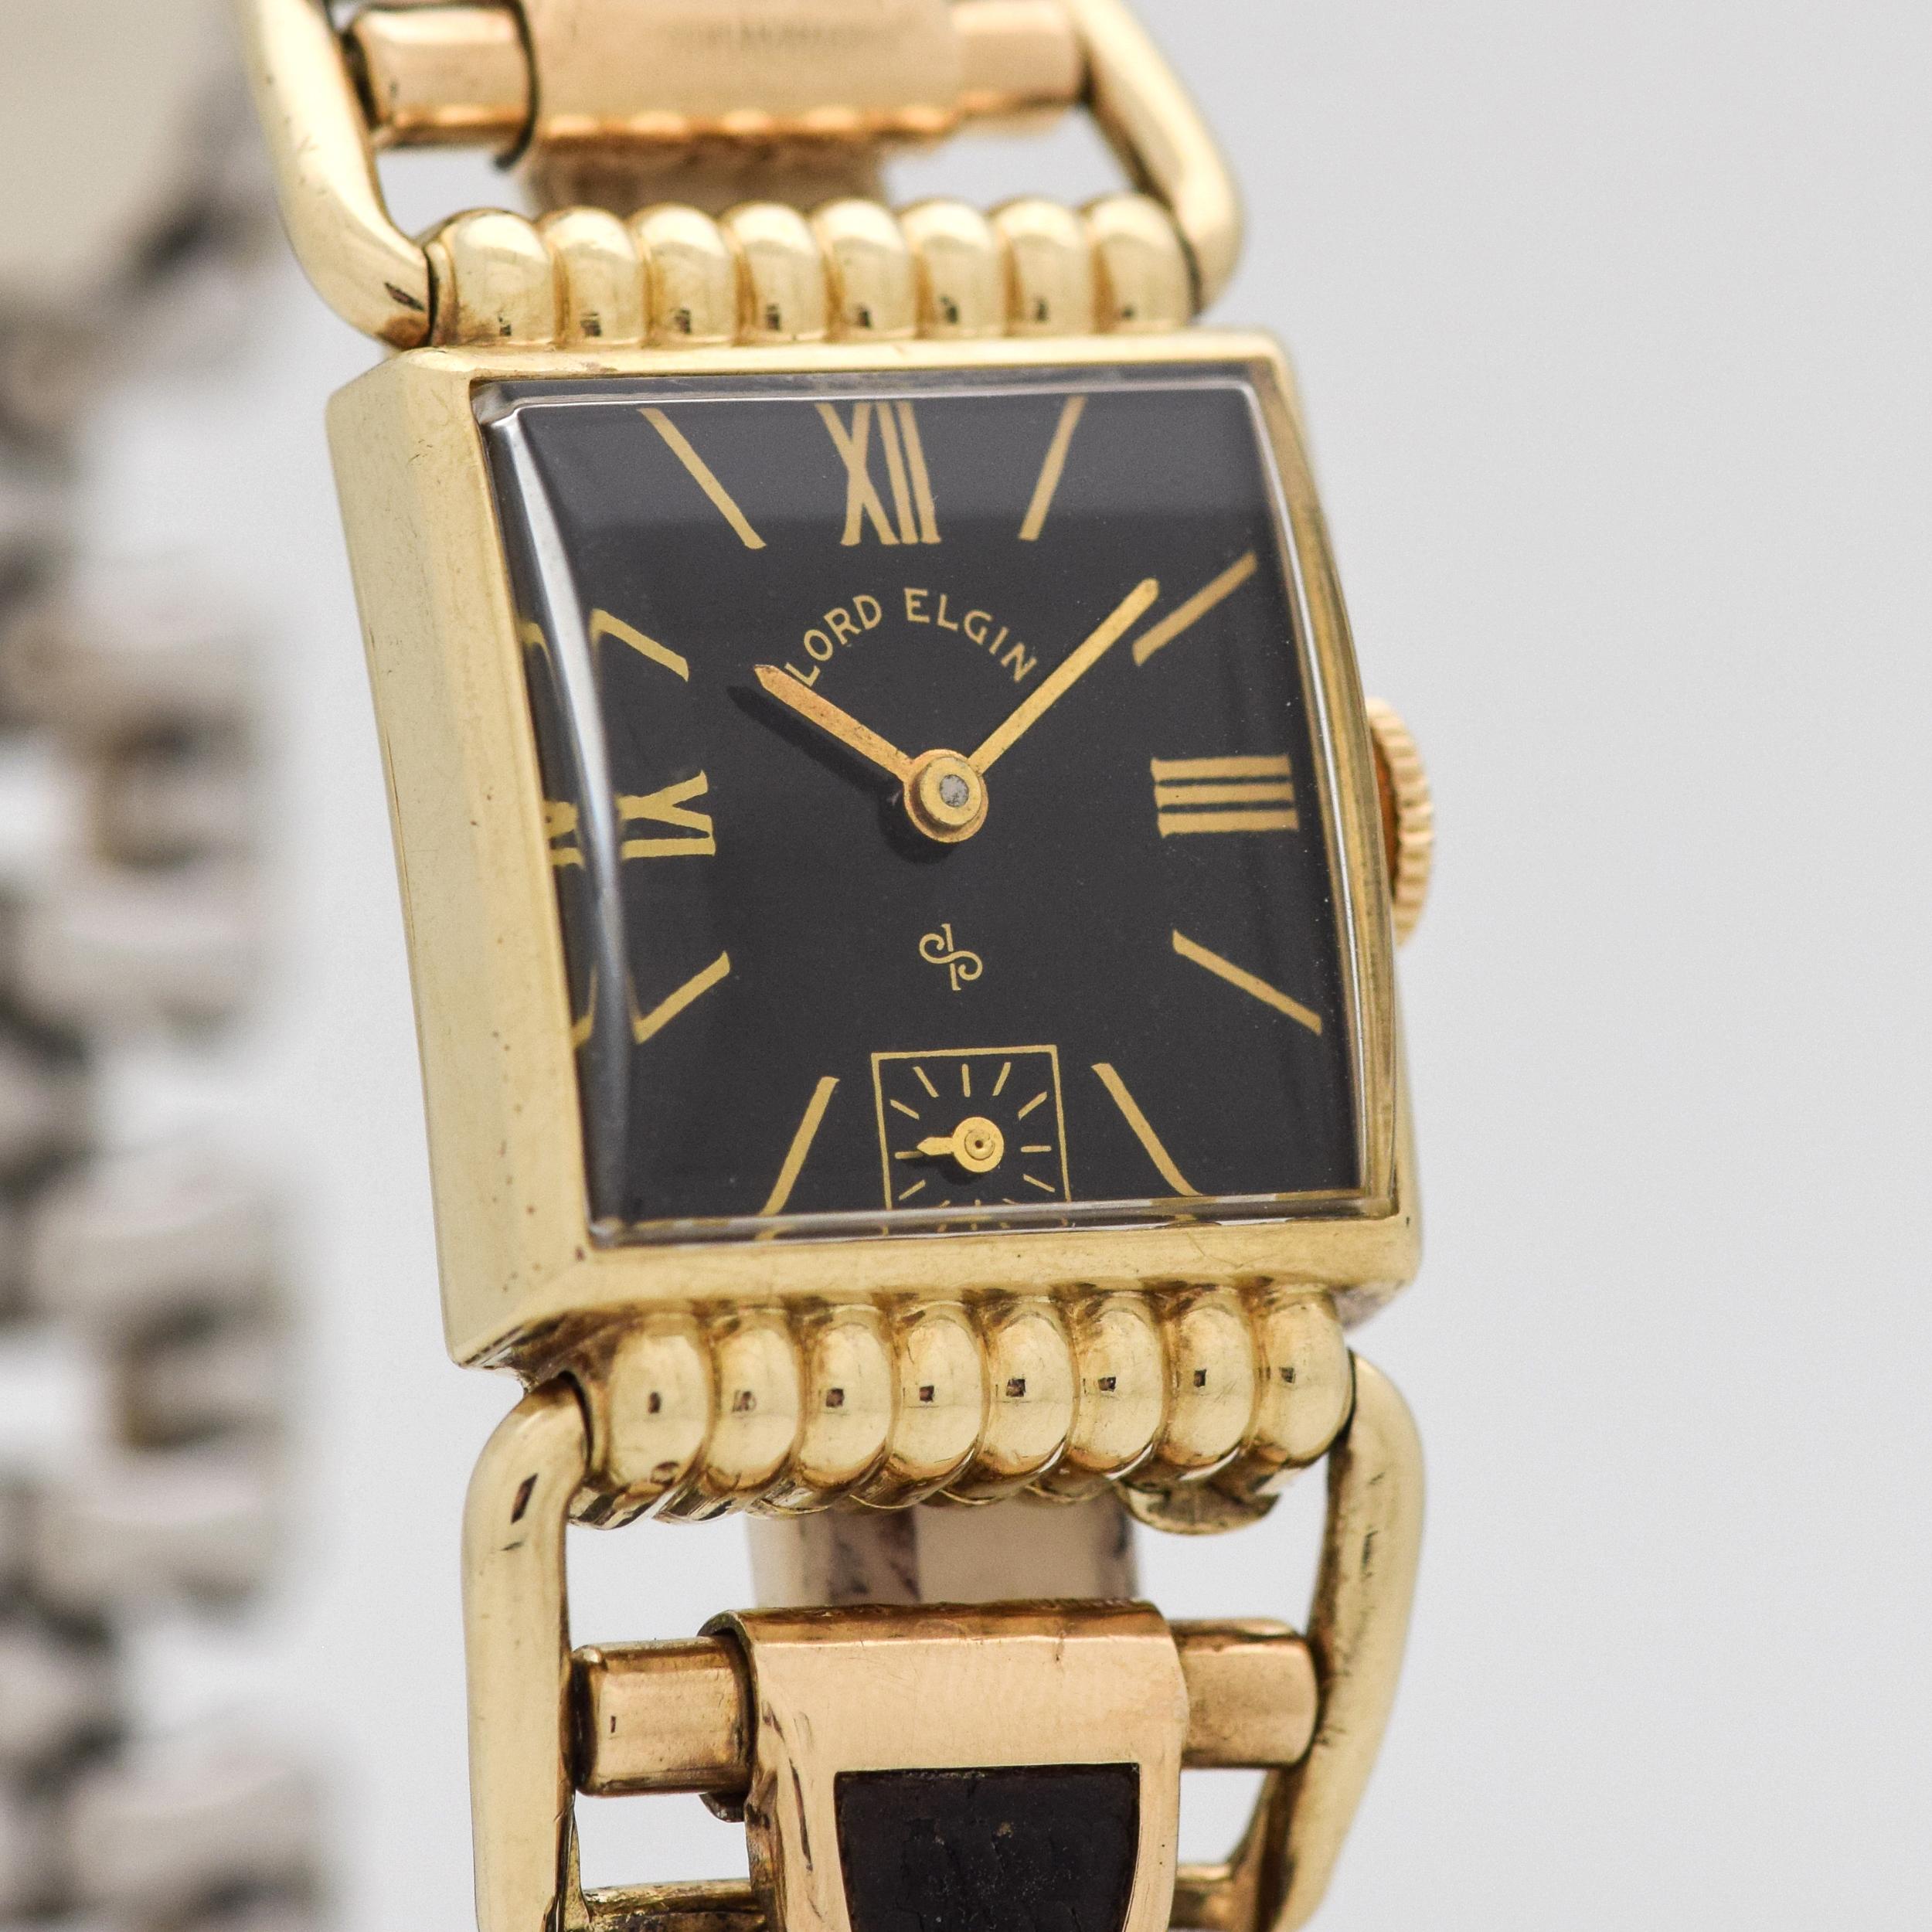 1952 Vintage Lord Elgin Driver's 14k Yellow Gold Filled watch with Original Black Dial with Gold Color Roman Numerals III/ IX, and XII with Time Period Correct Expandable Stretchy 12k Yellow Gold Filed and Black Lizard Skin Bracelet. 20mm x 45mm lug